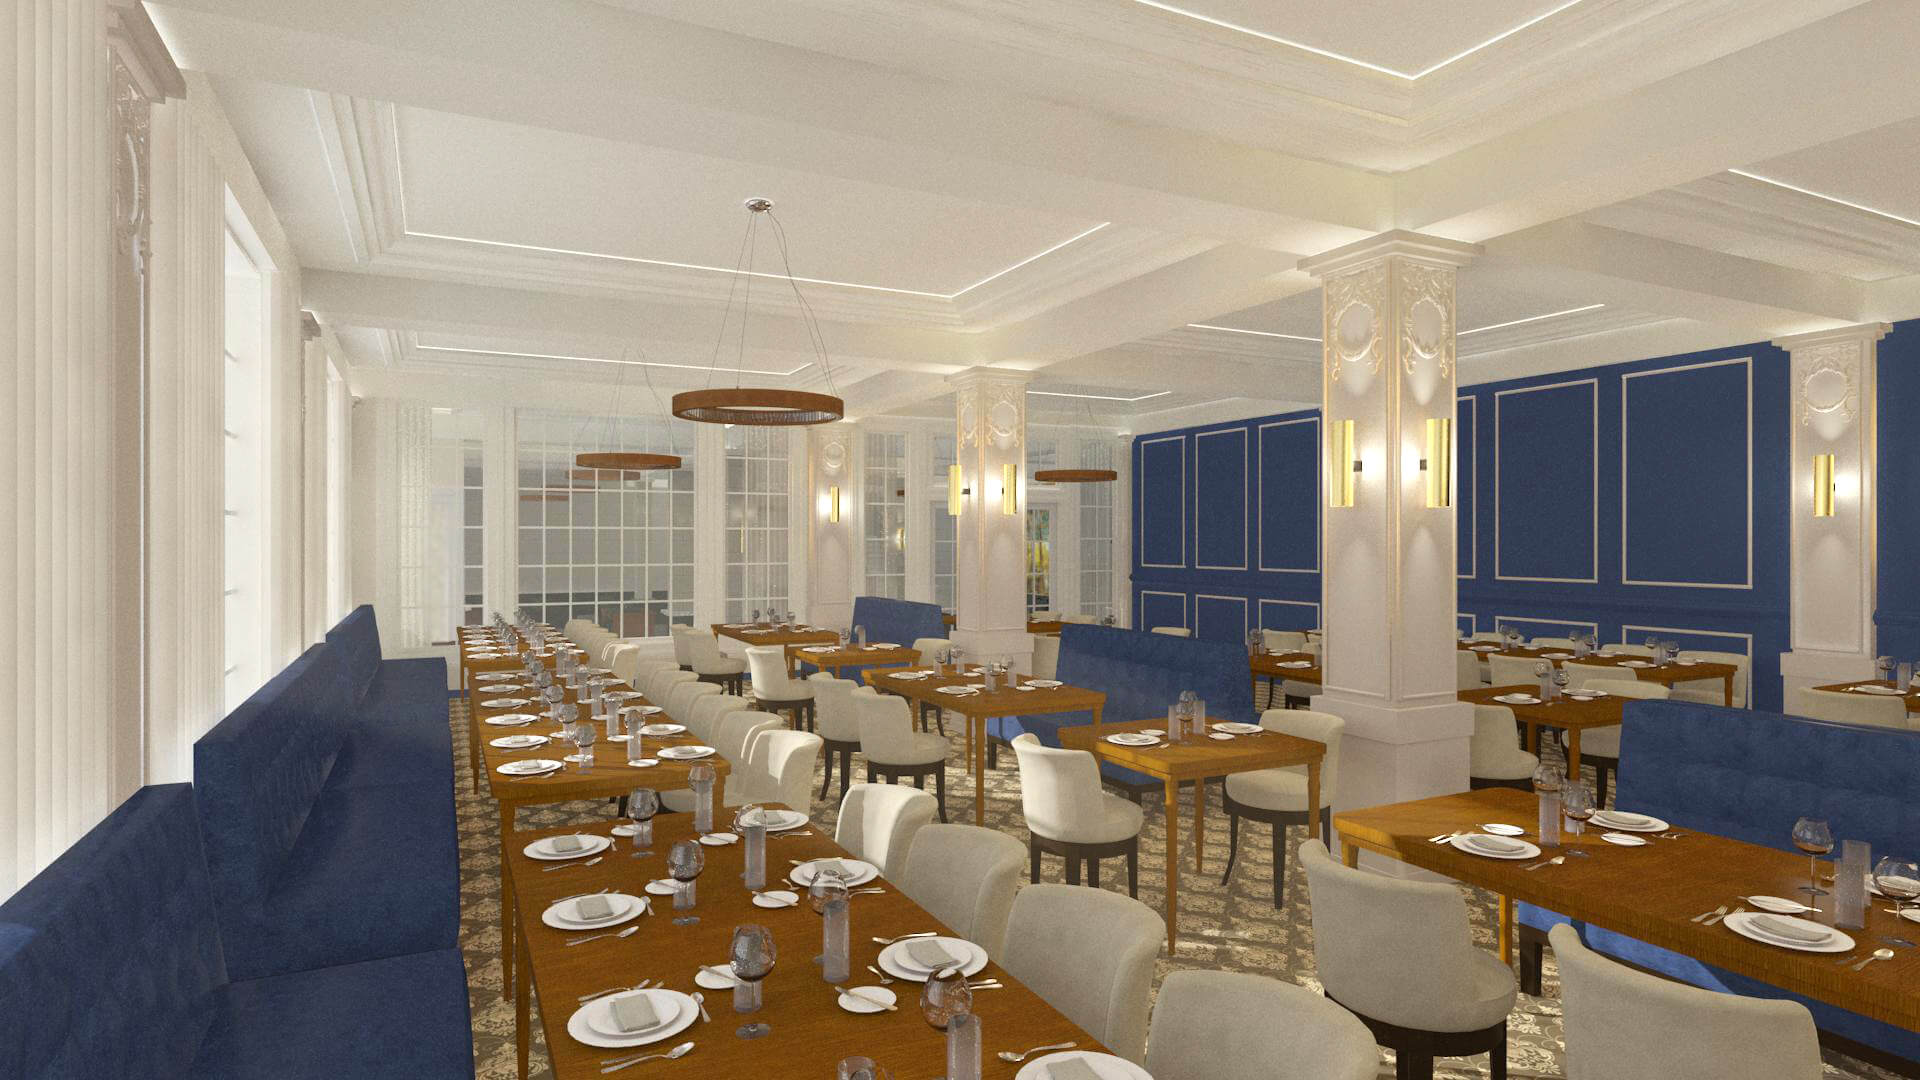 Rendering of new proposed dining room within Kaskaskia hotel. Blue bench seating with blue accent wall and brown wooden tables